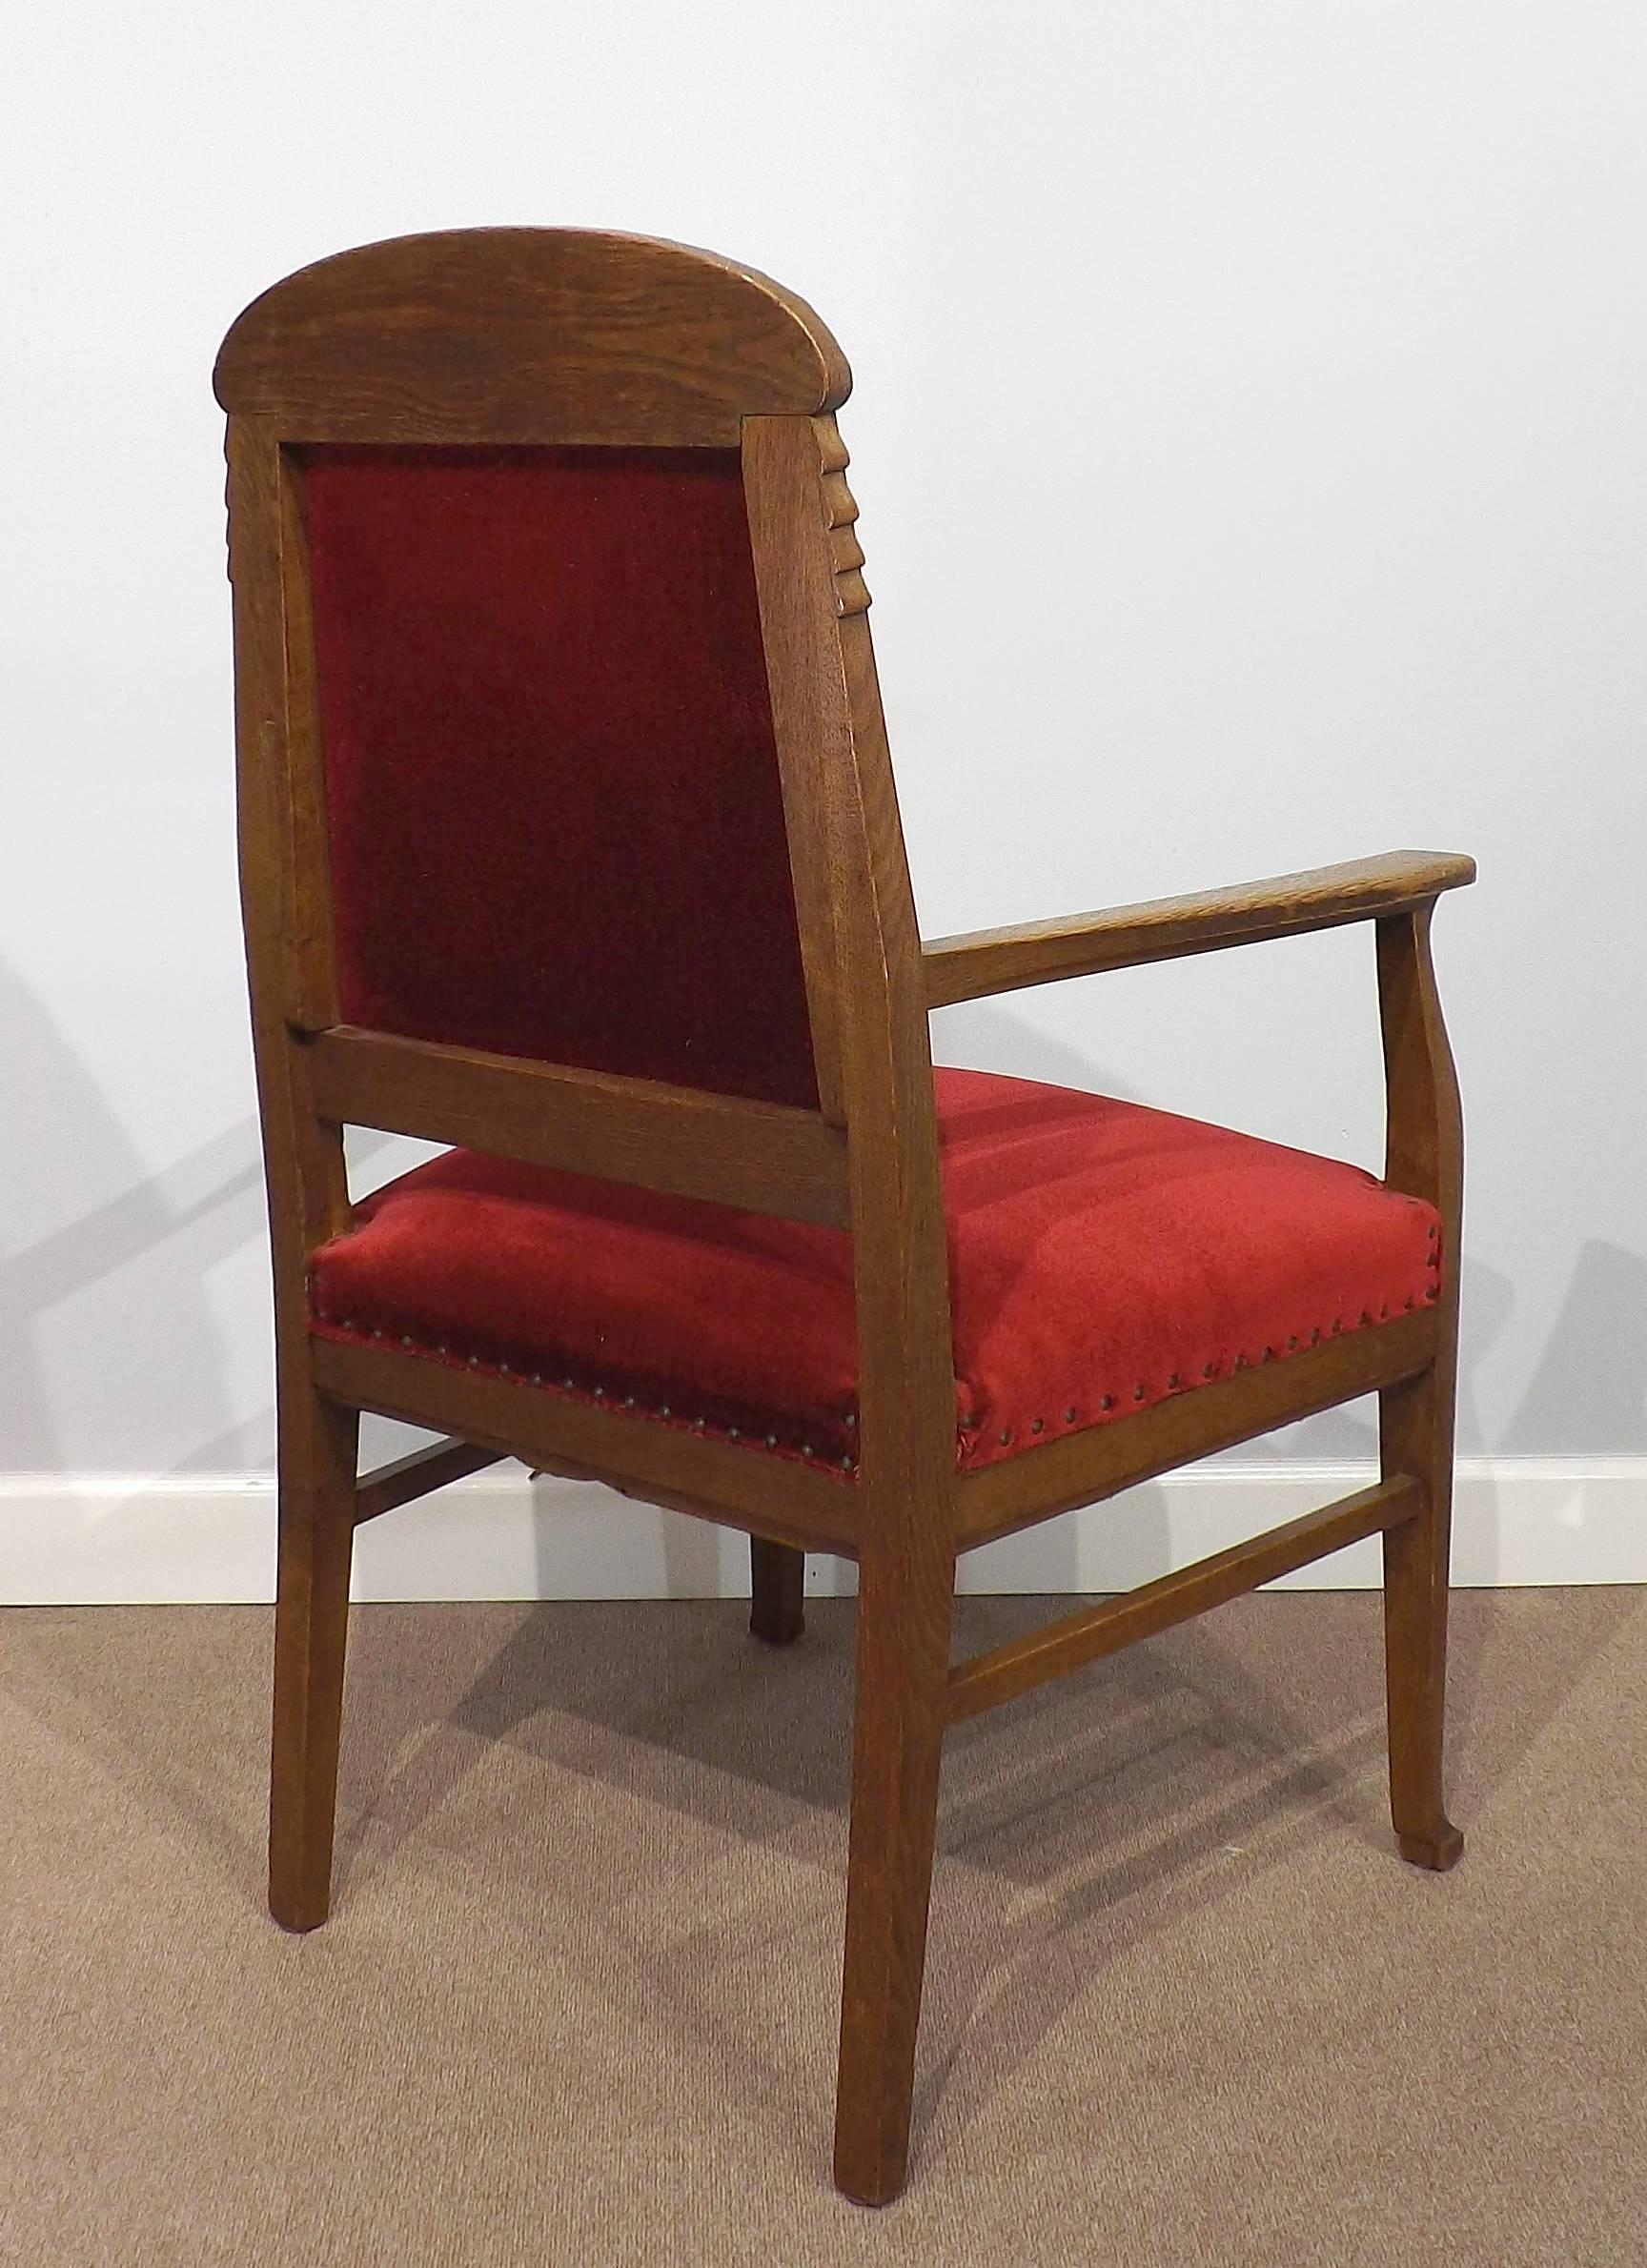 Carved Amsterdam Modernist Armchair, circa 1905 For Sale